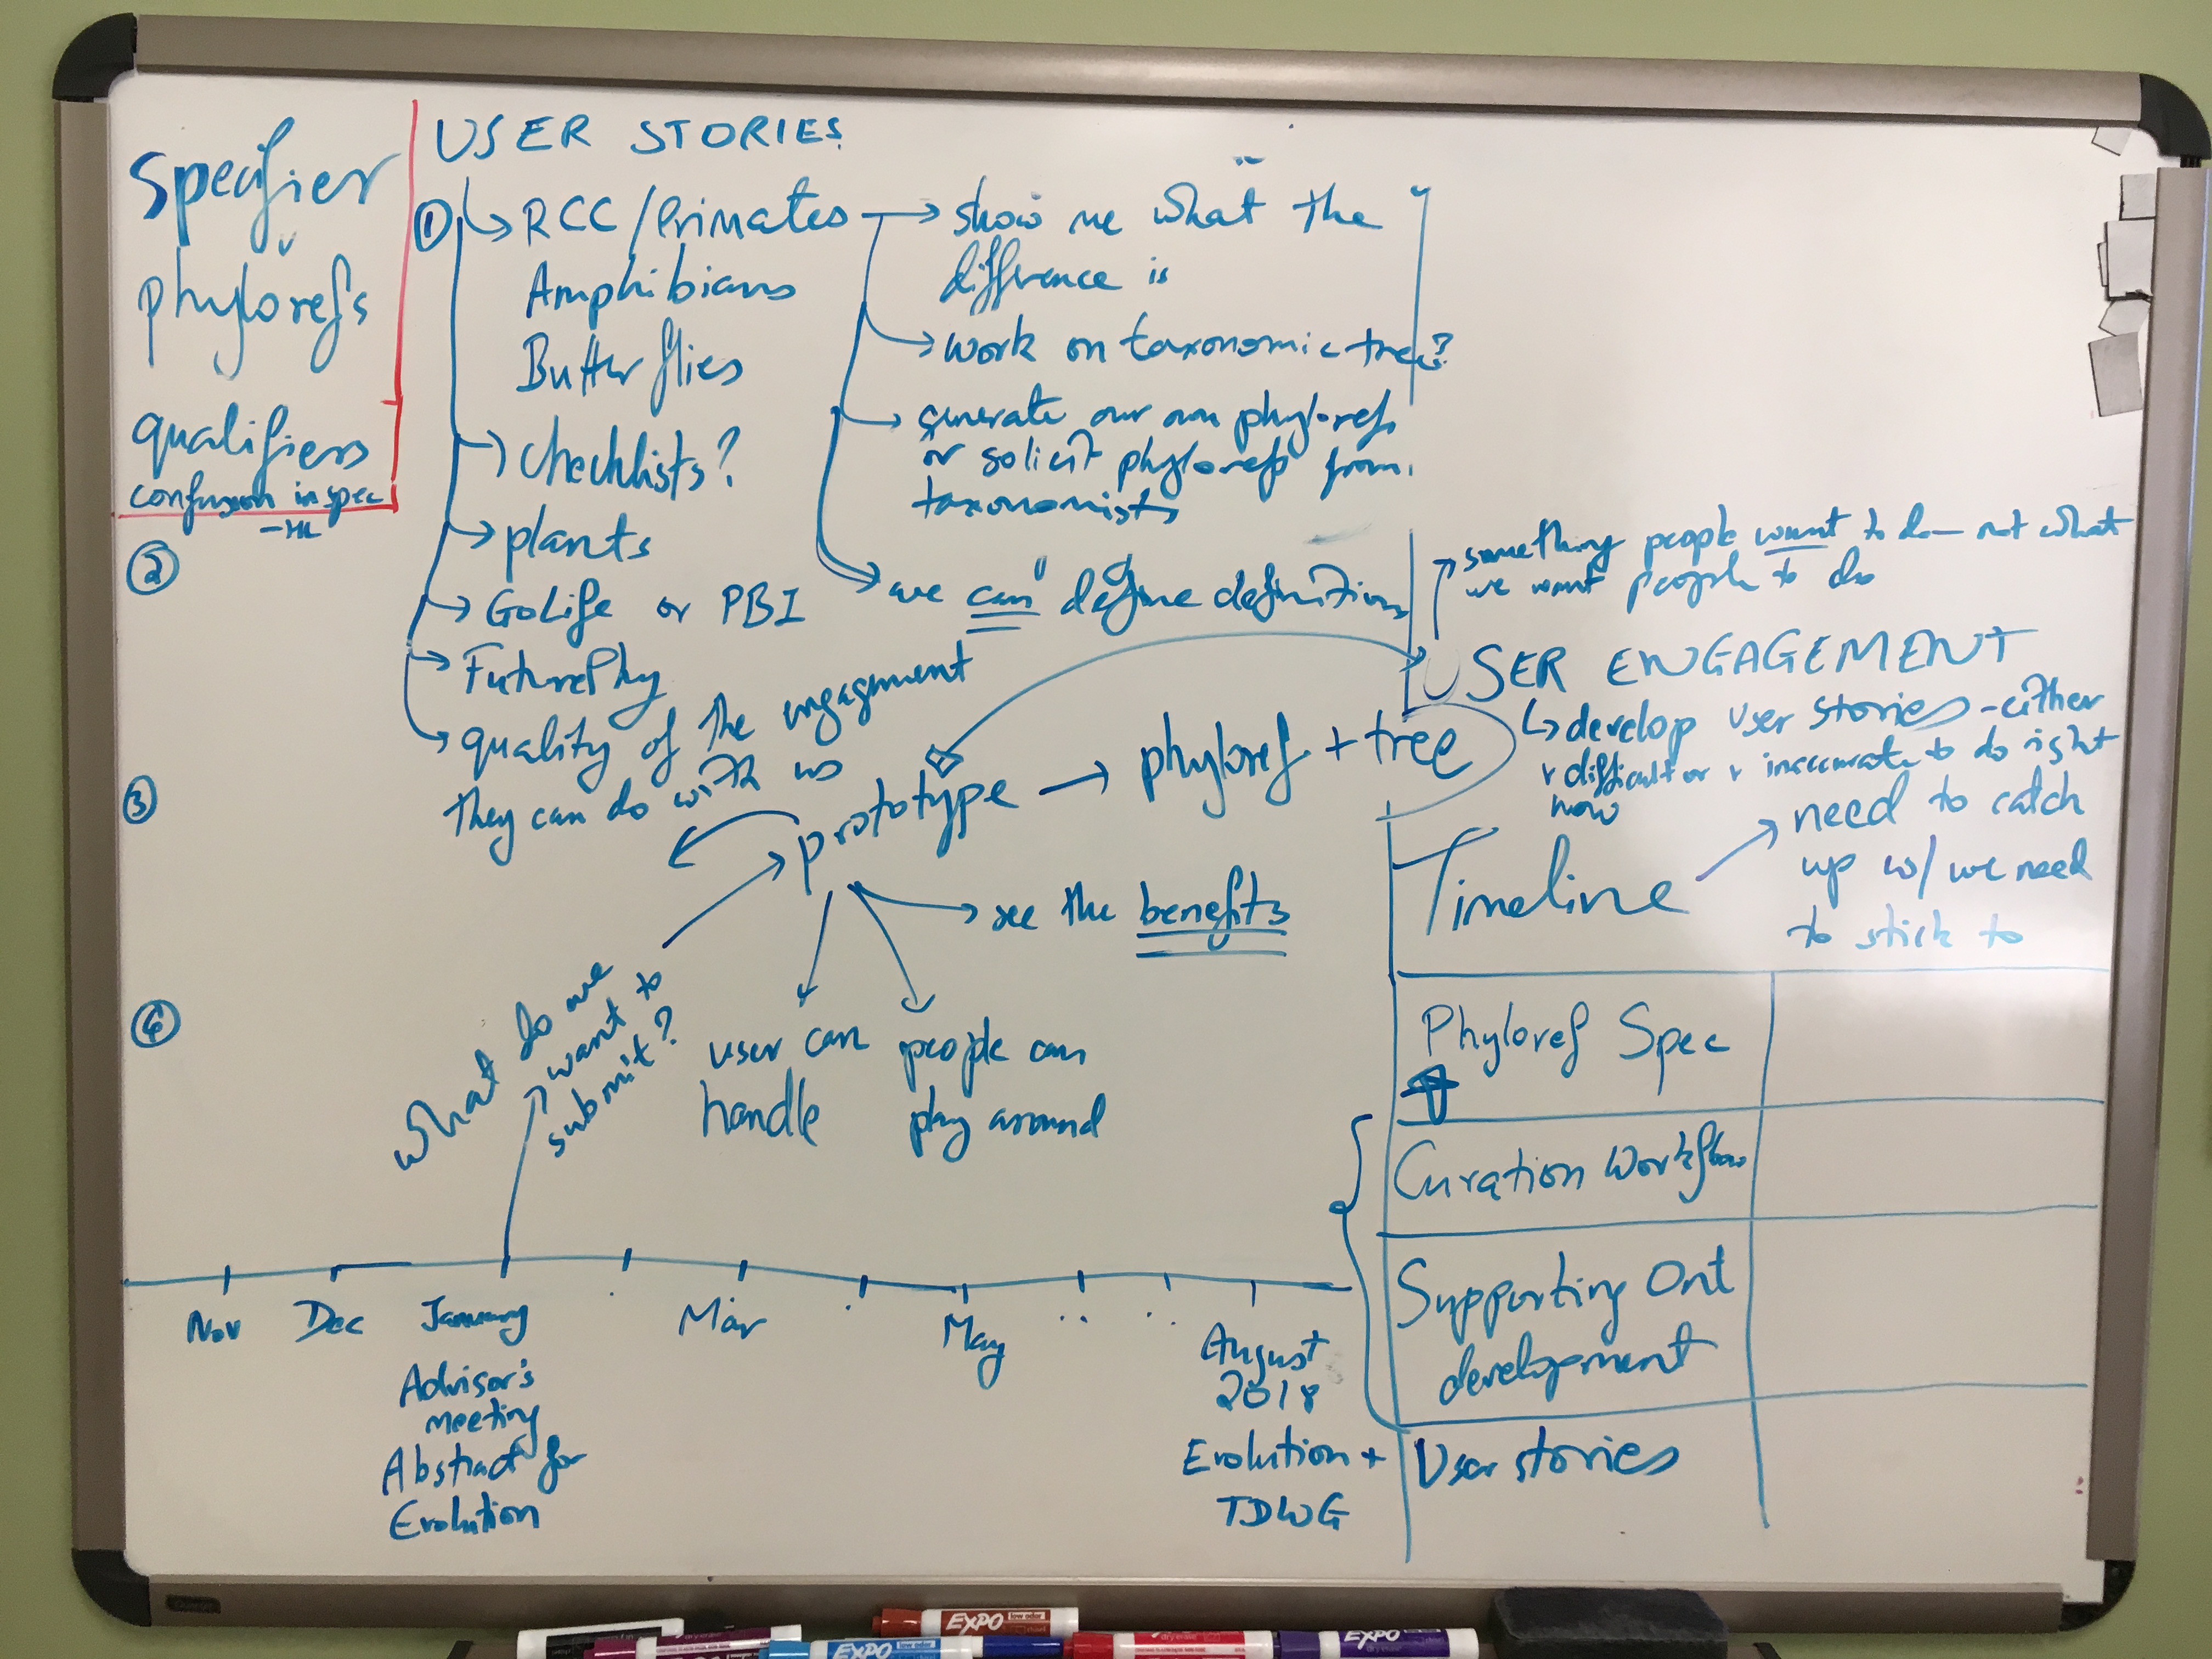 Discussion agenda items laid  on whiteboard: user stories, prototype, Phyloref specifications adn timeline